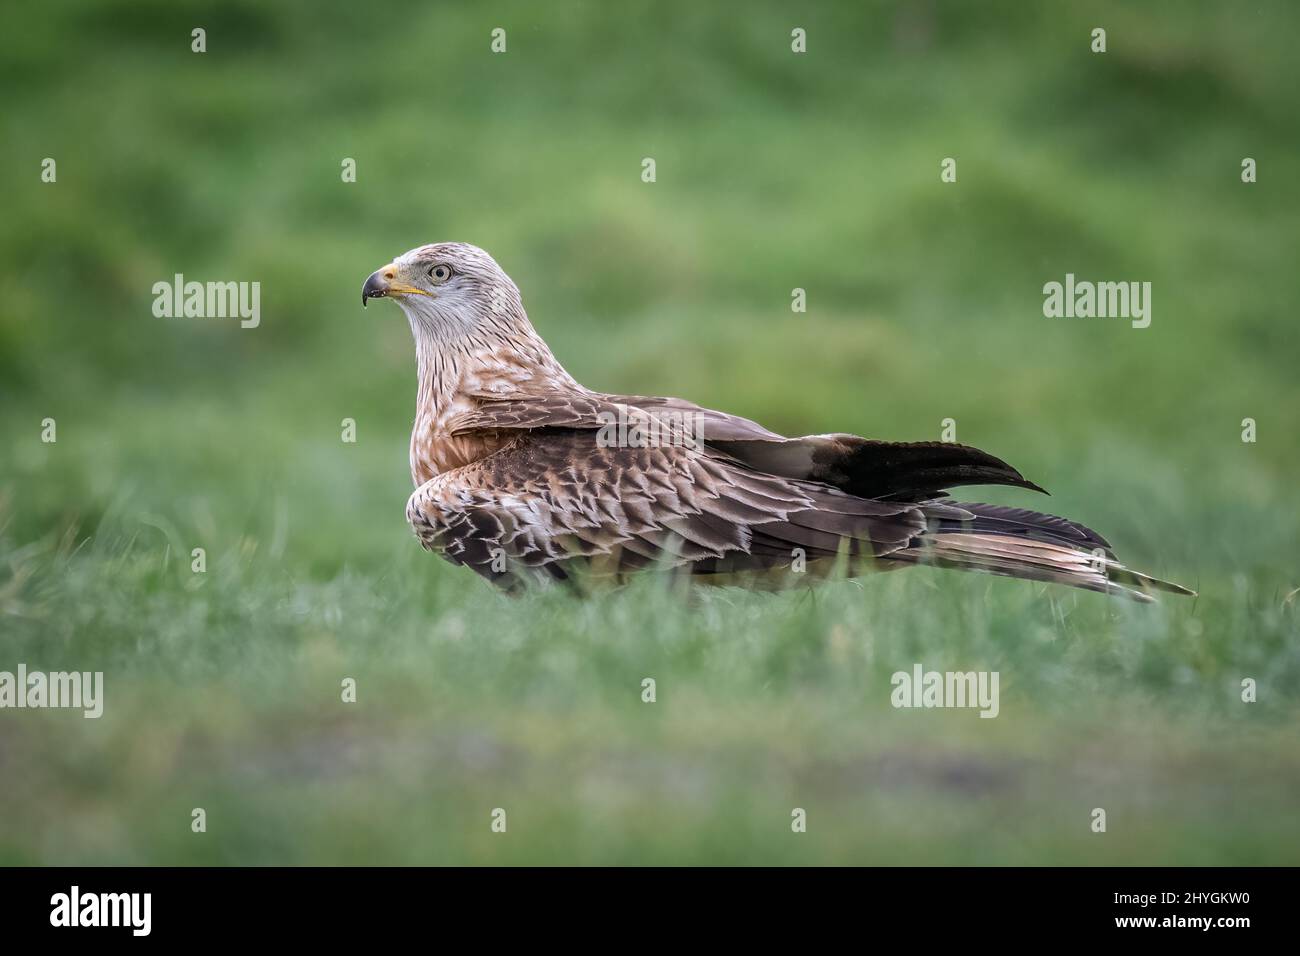 A close up portrait of a red kite, milvus milvus, standing on the grass with out of focus foreground and background Stock Photo